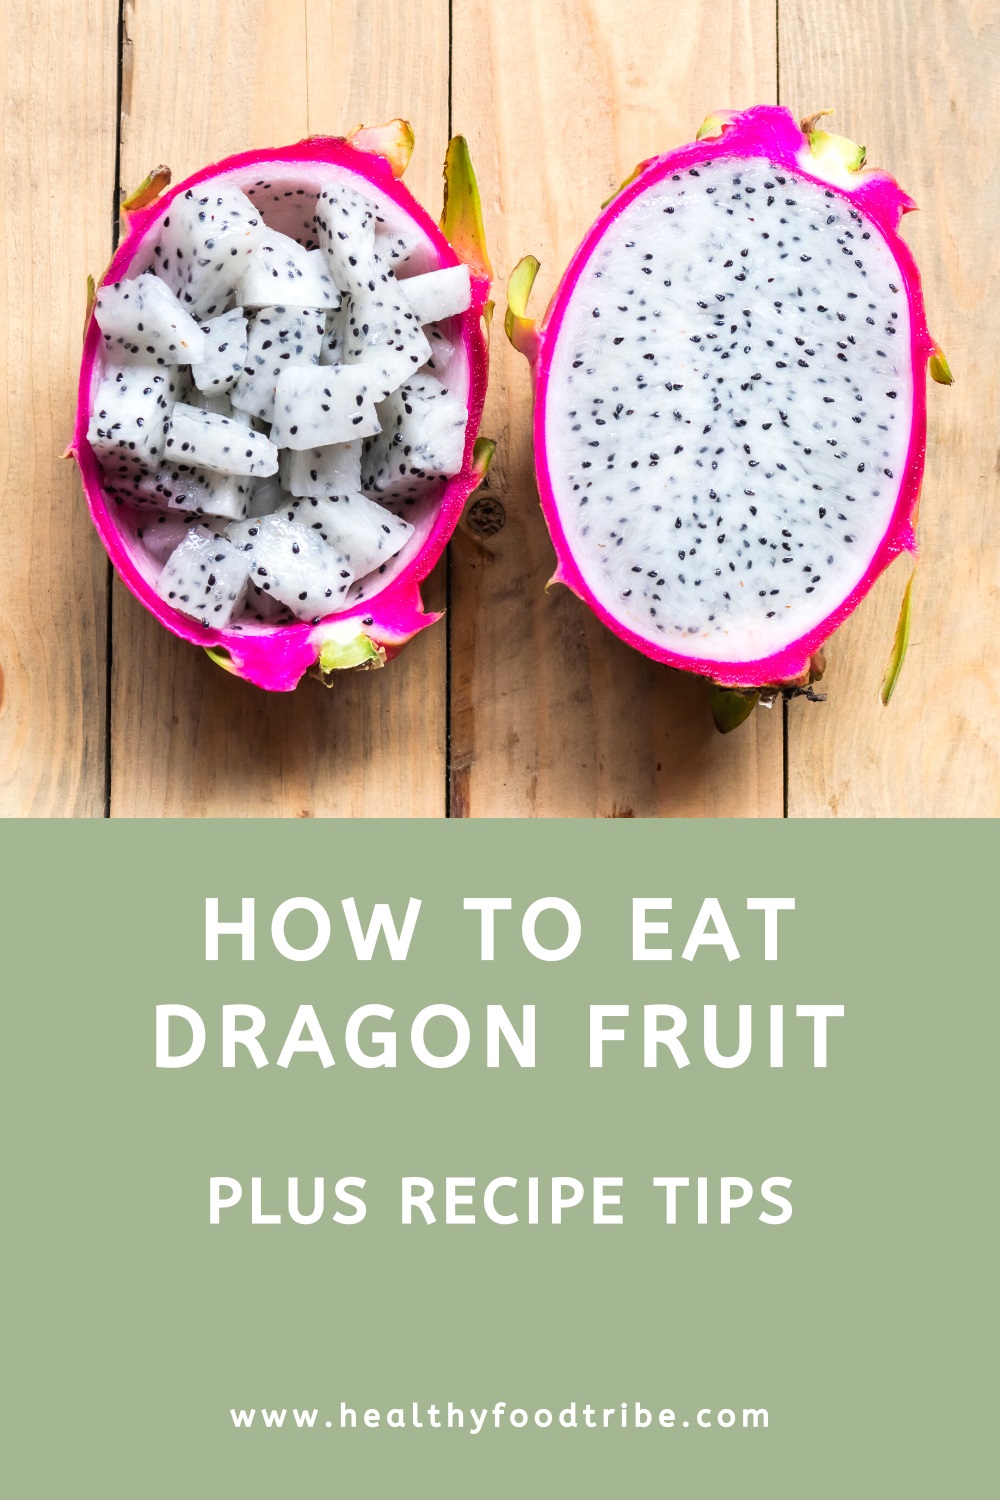 How to eat a dragon fruit (plus recipe tips)